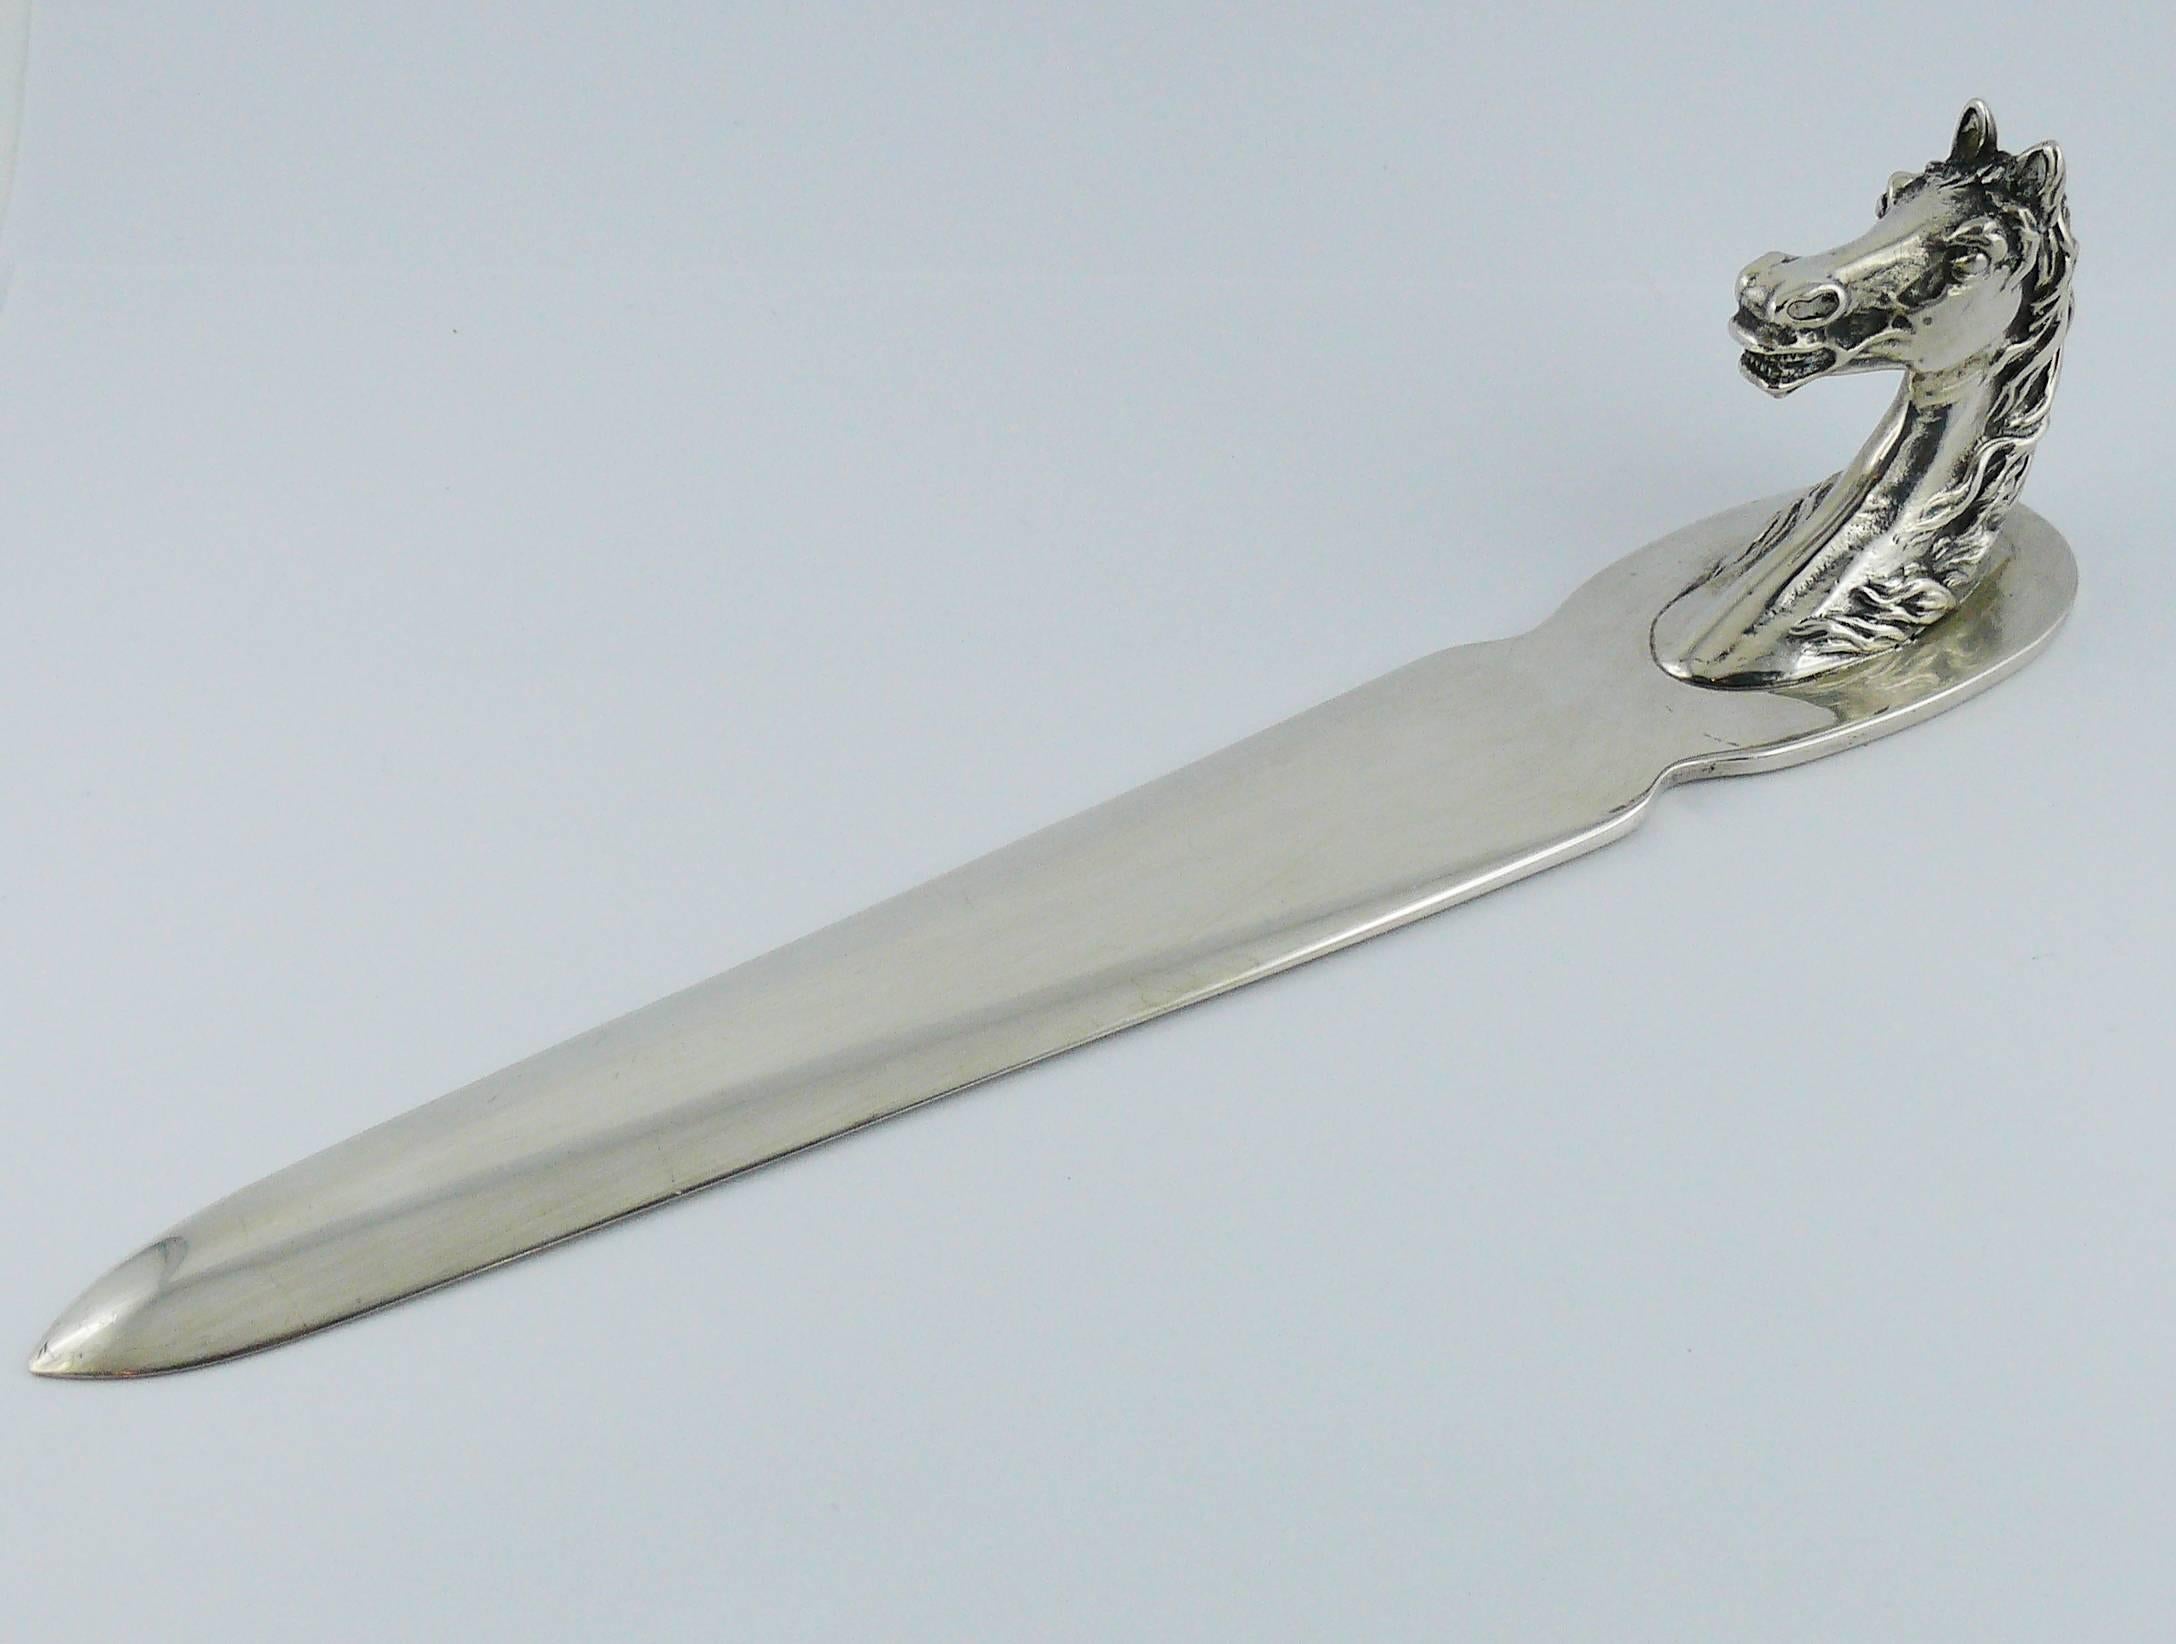 HERMES Paris vintage silver-plated horse head letter opener.

Embossed HERMES PARIS Made in France.
RAVINET D'ENFERT hallmark.

Indicative measurements : length approx. 22.2 cm (8.74 inches) / max. width 3.4 cm (1.34 inches).

NOTES
- This